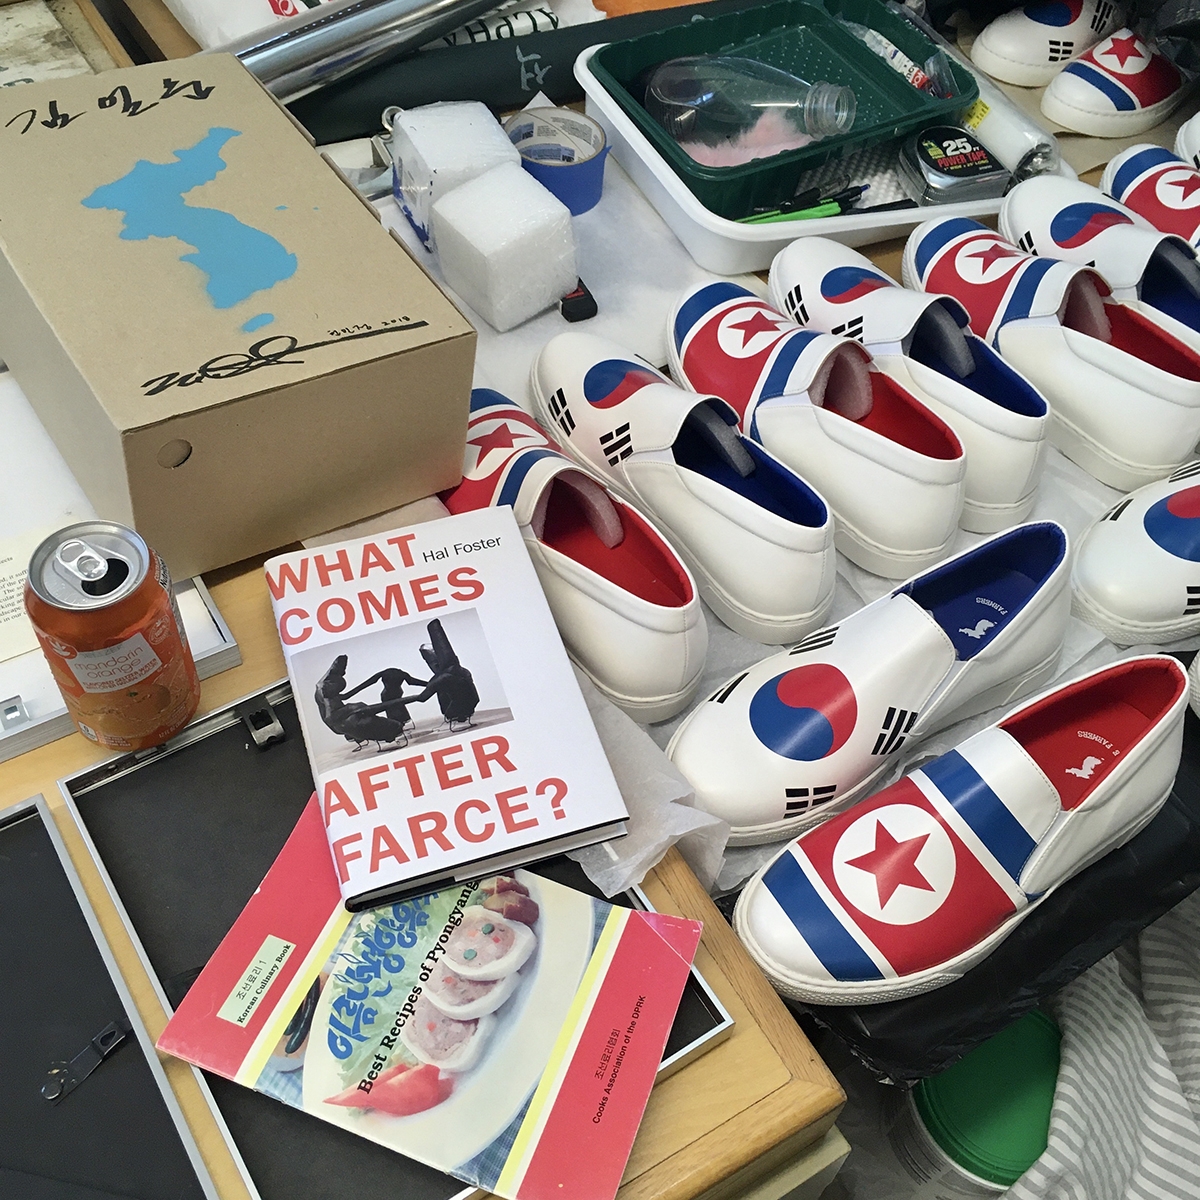 An orange aluminum can, a book by Hal Foster, a cookbook, and many pairs of white slip on shoes with the North and South Korean flags appear on a surface.